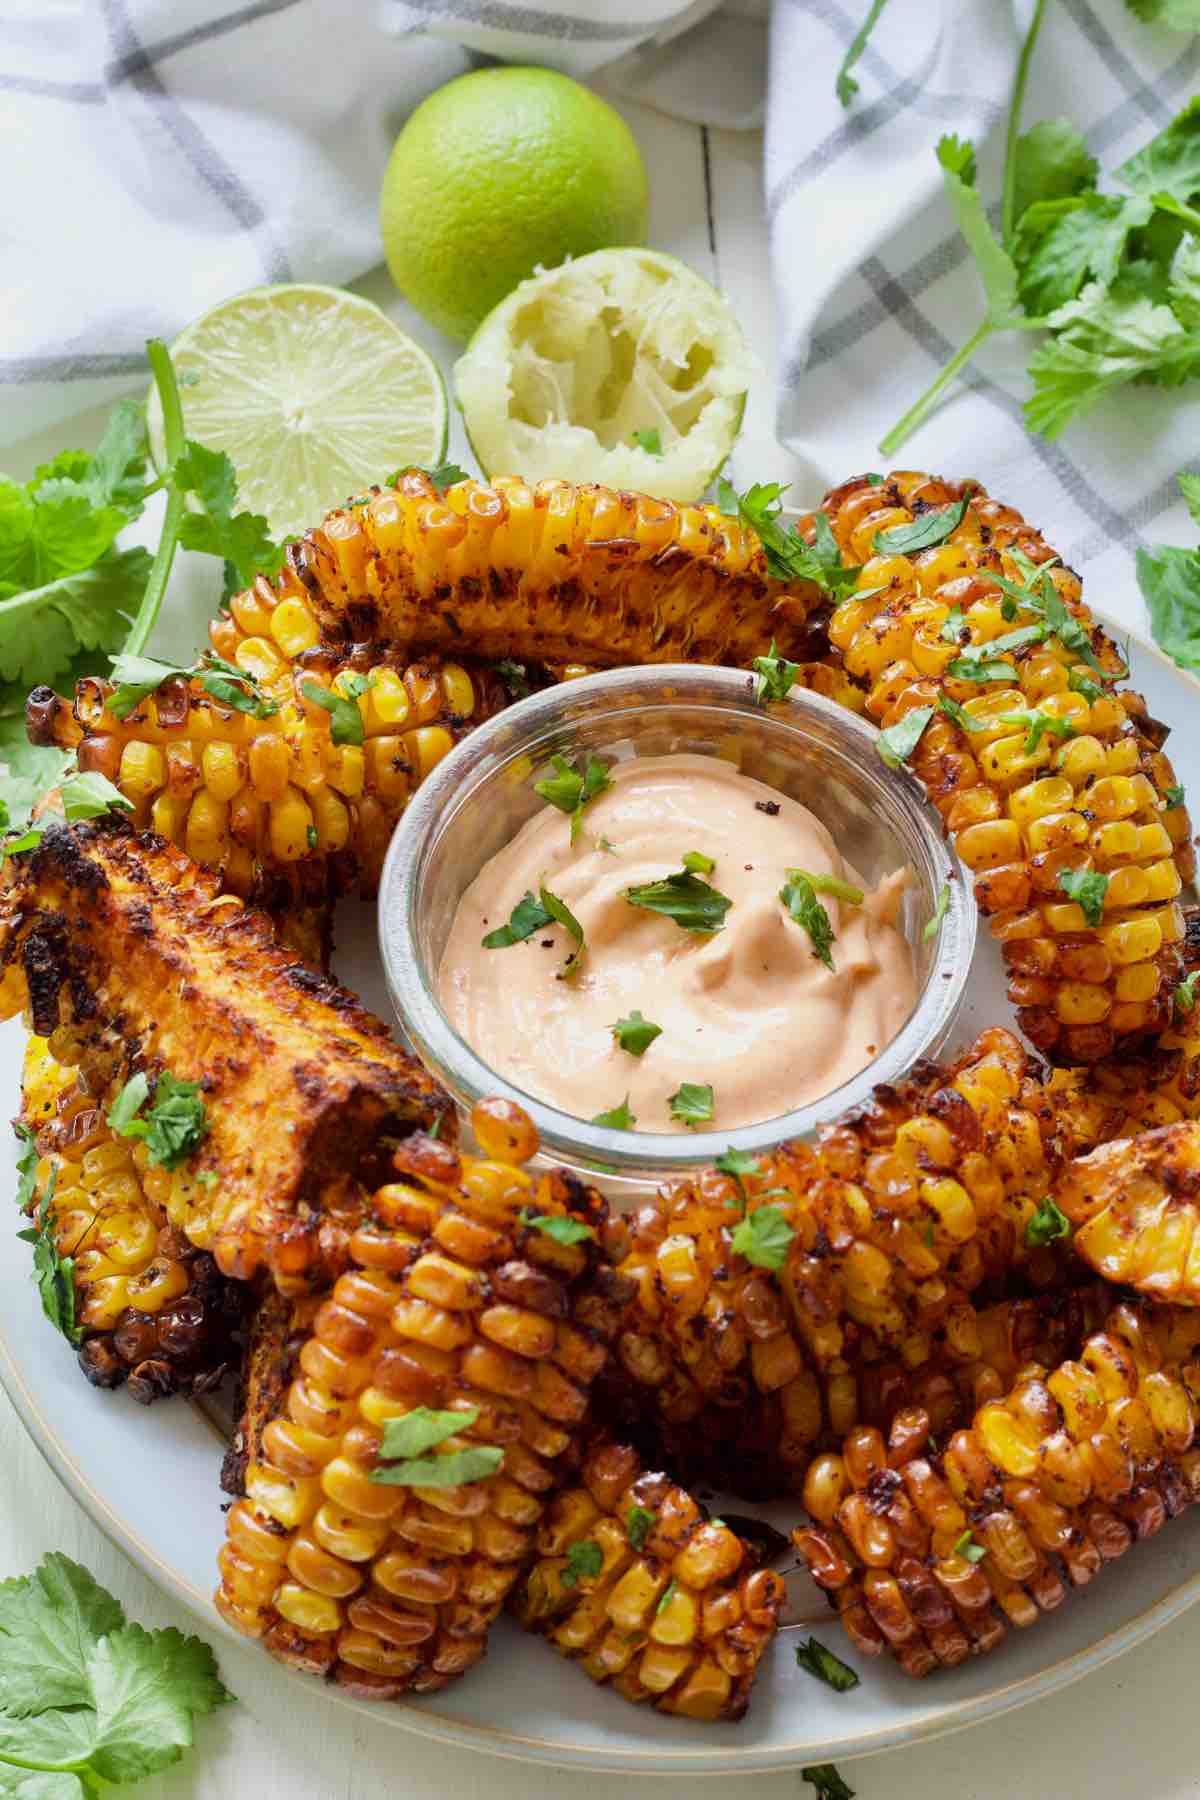 Plate with corn ribs, dip, limes and coriander around it.